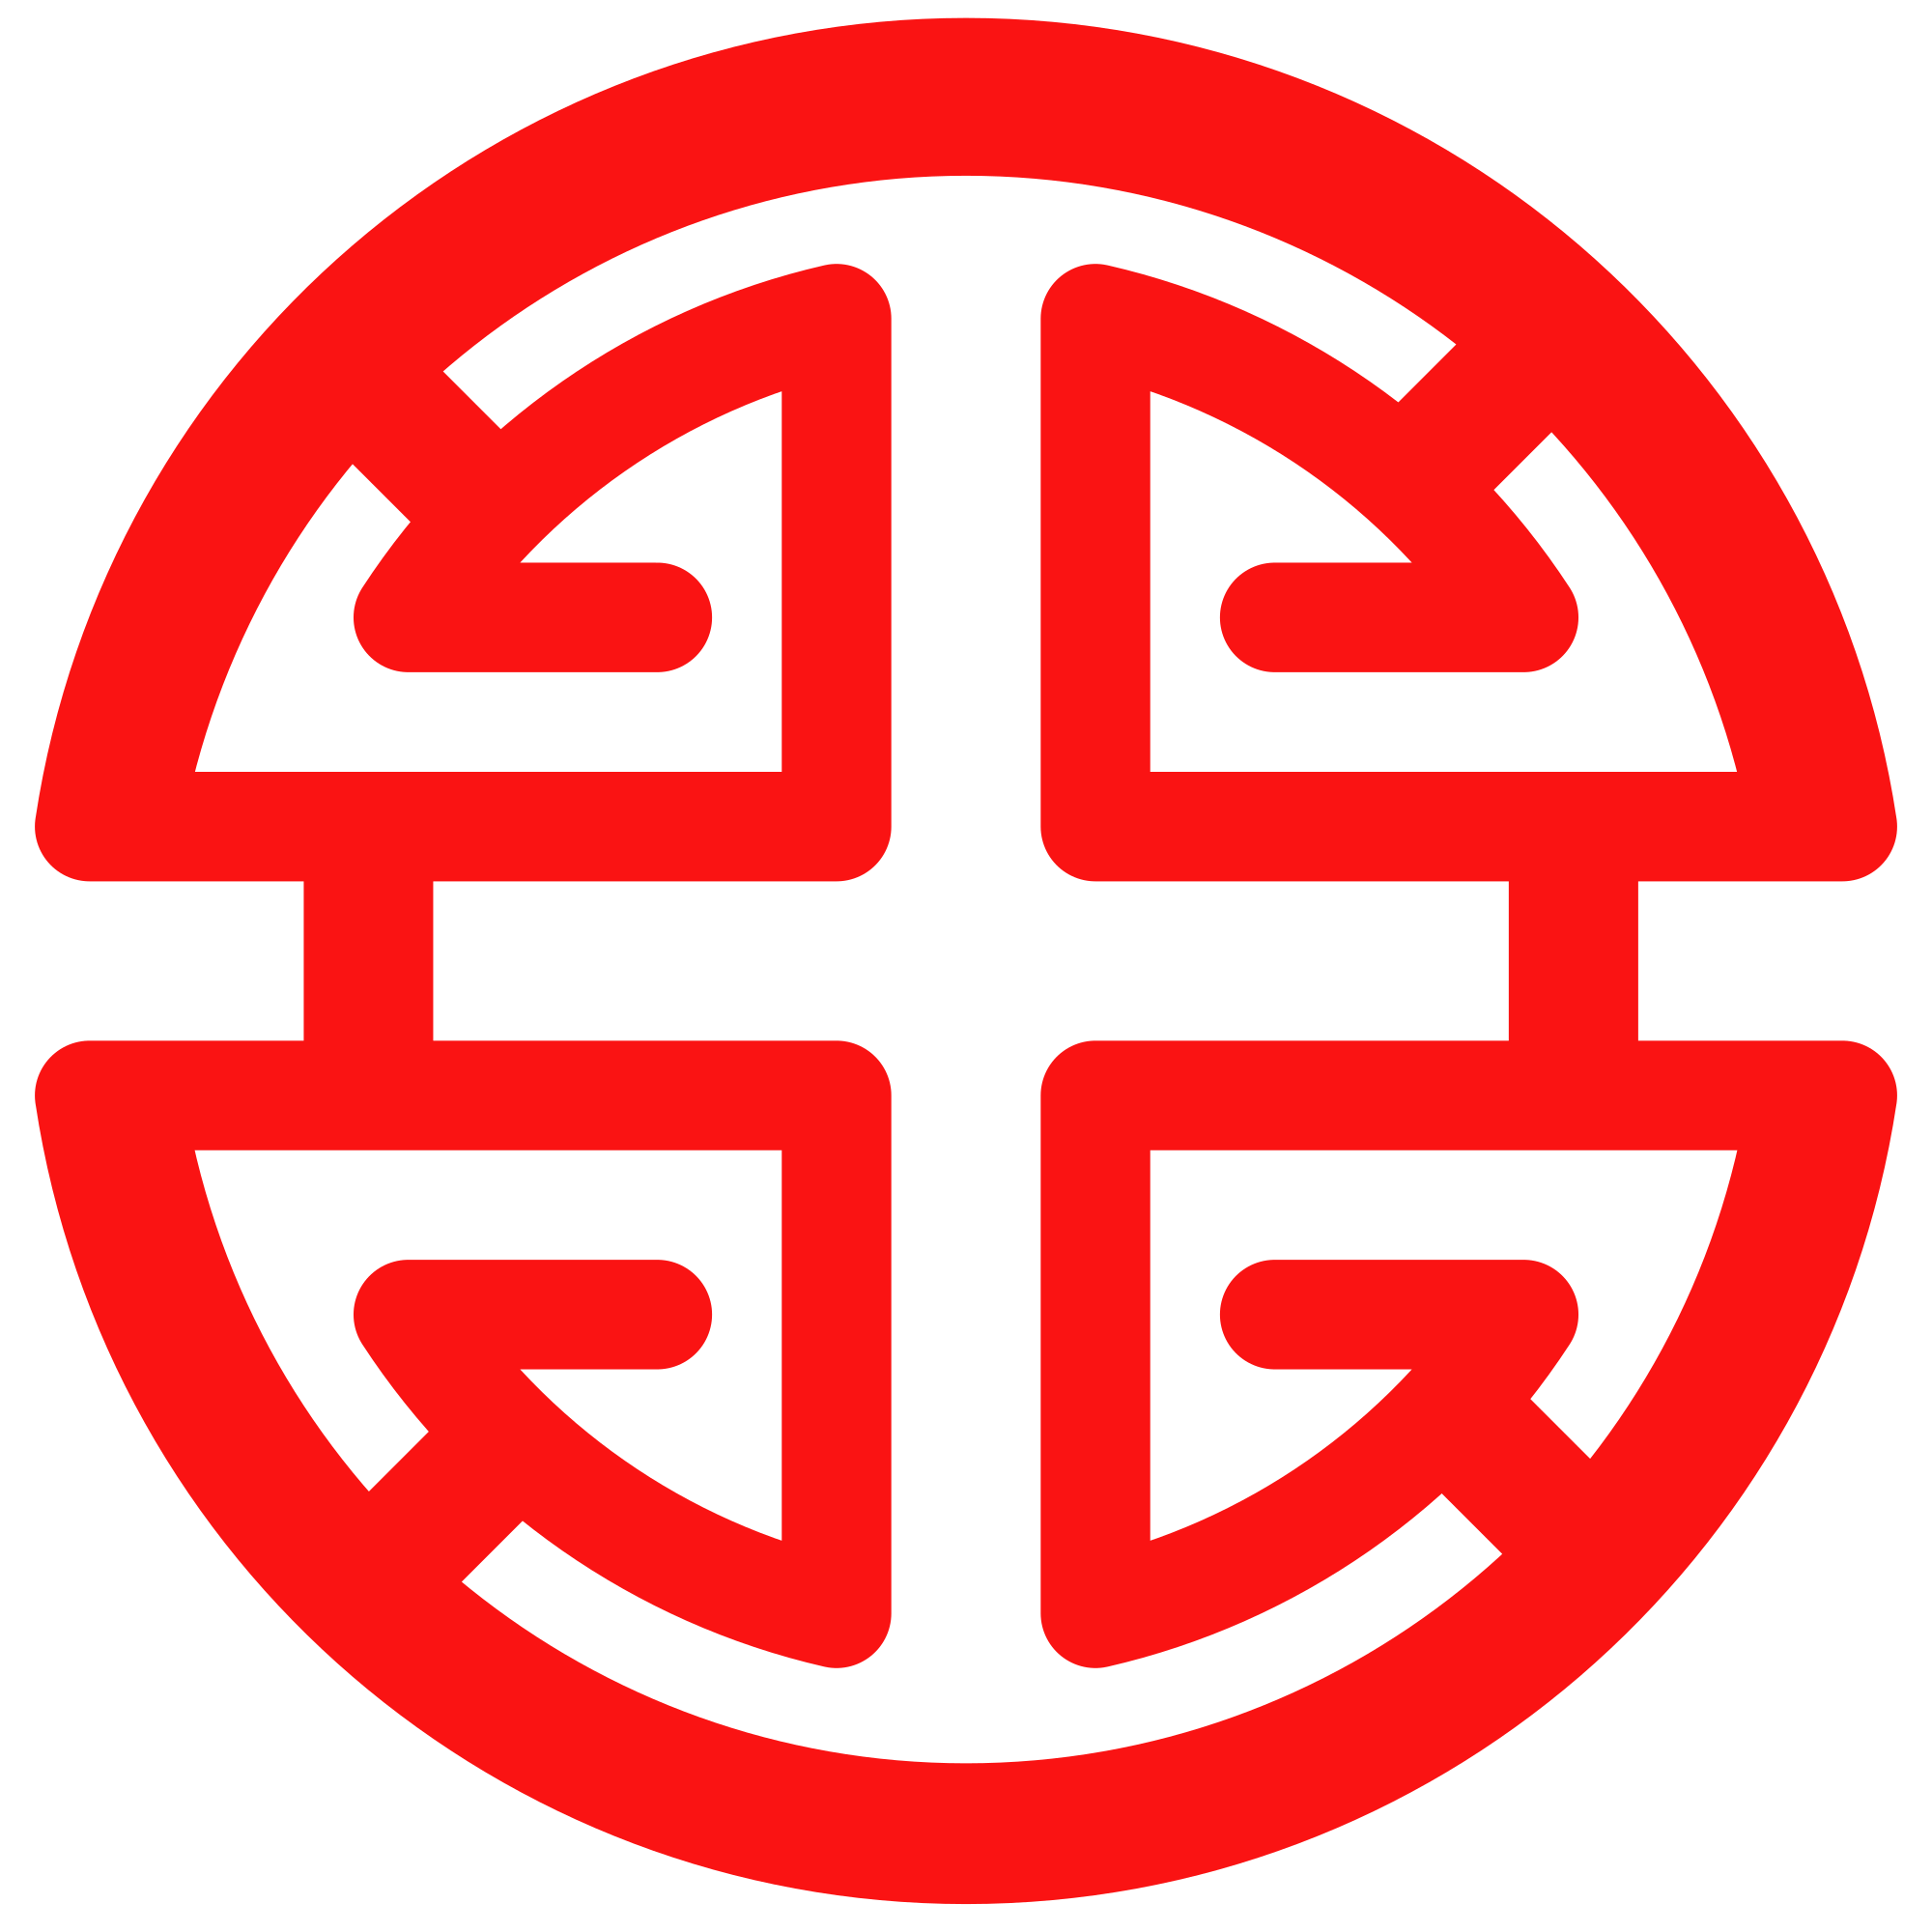 Red Chinese Logo - File:禄 lù or 子 zi symbol---red.svg - Wikimedia Commons